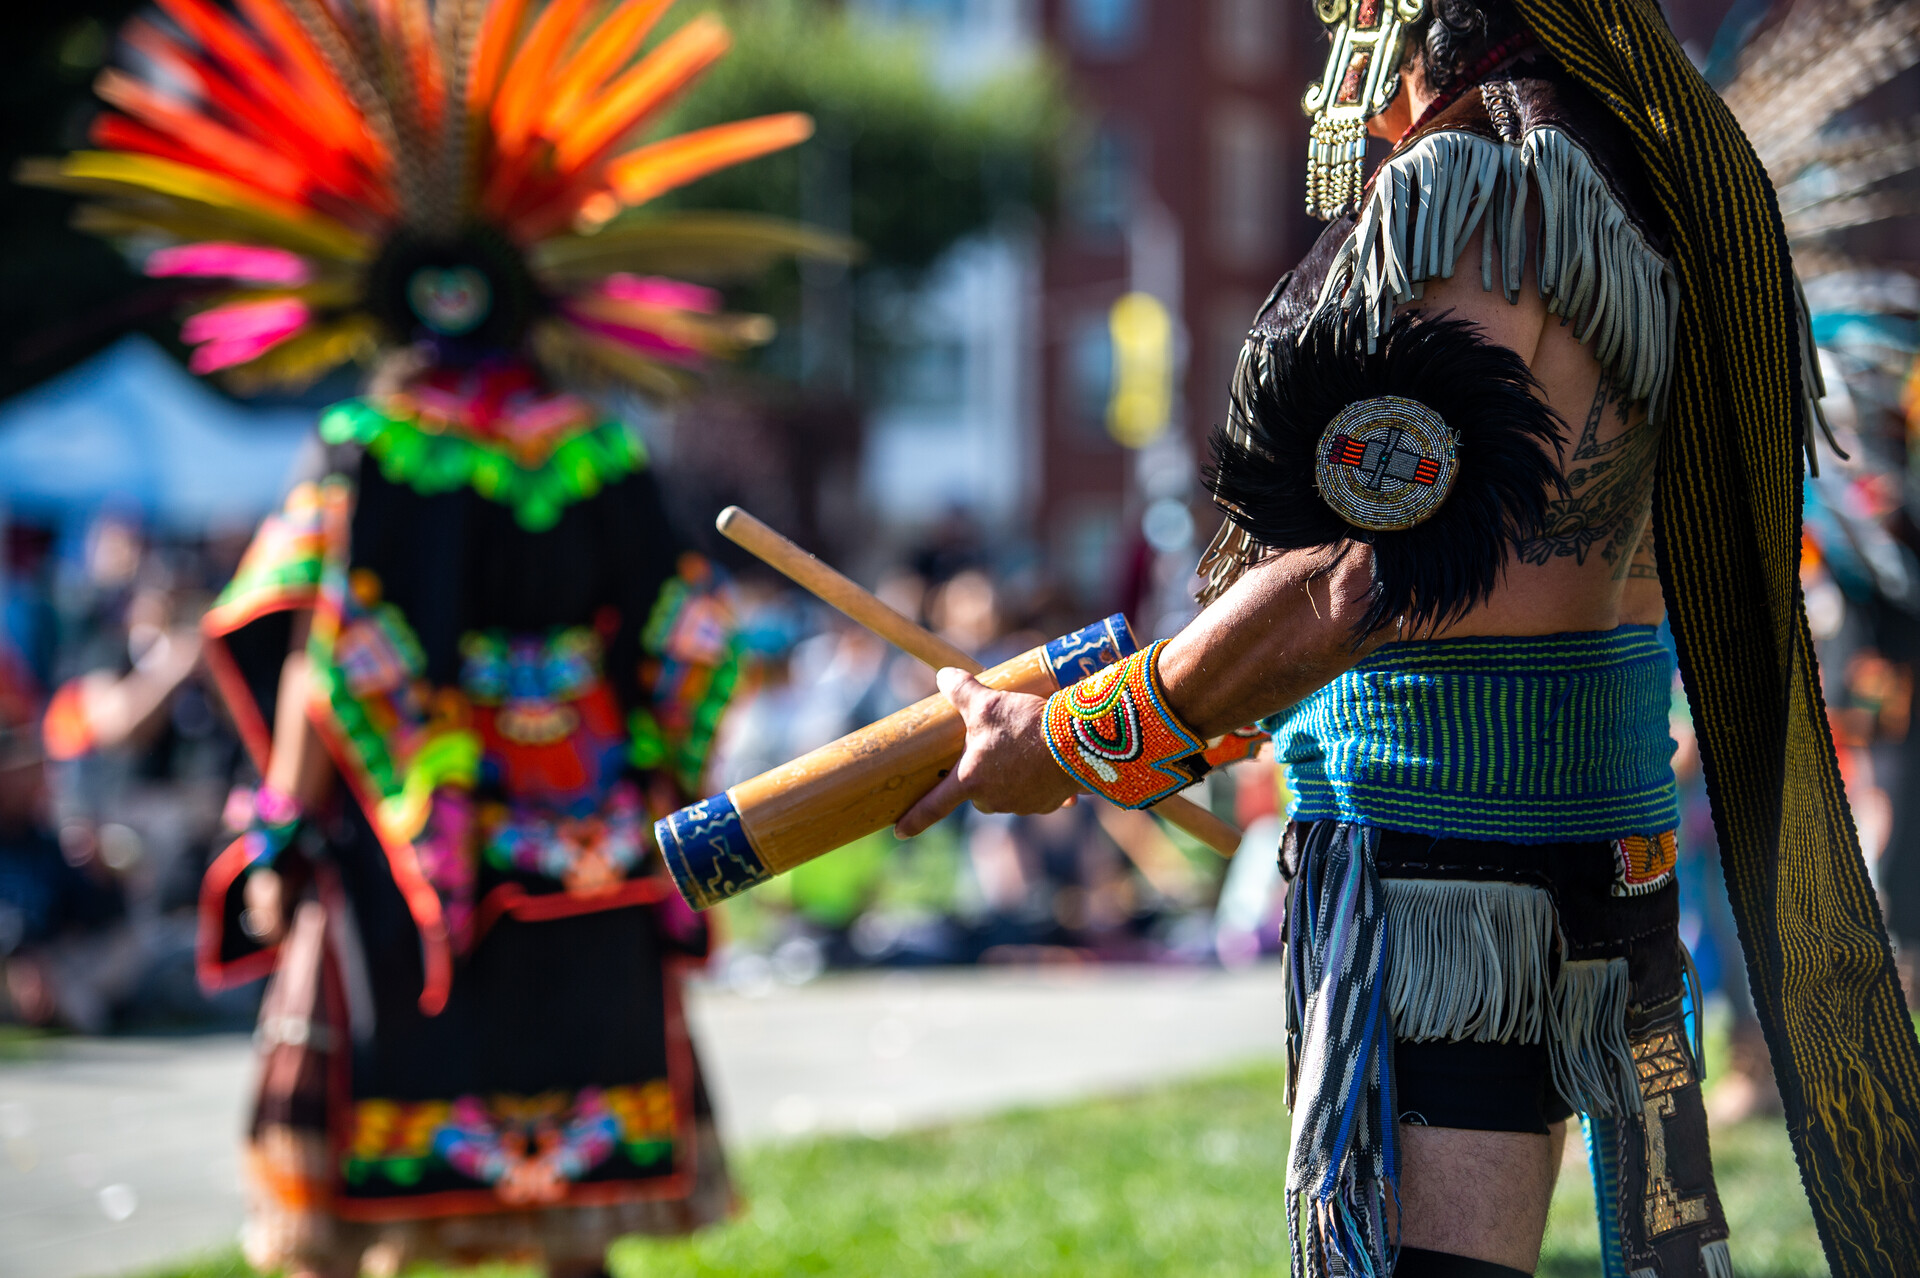 An Aztec dancer in colorful feathered head dresses garb plays a traditional percussion instrument as another dancer stands in the background on a lawn surrounded by onlookers